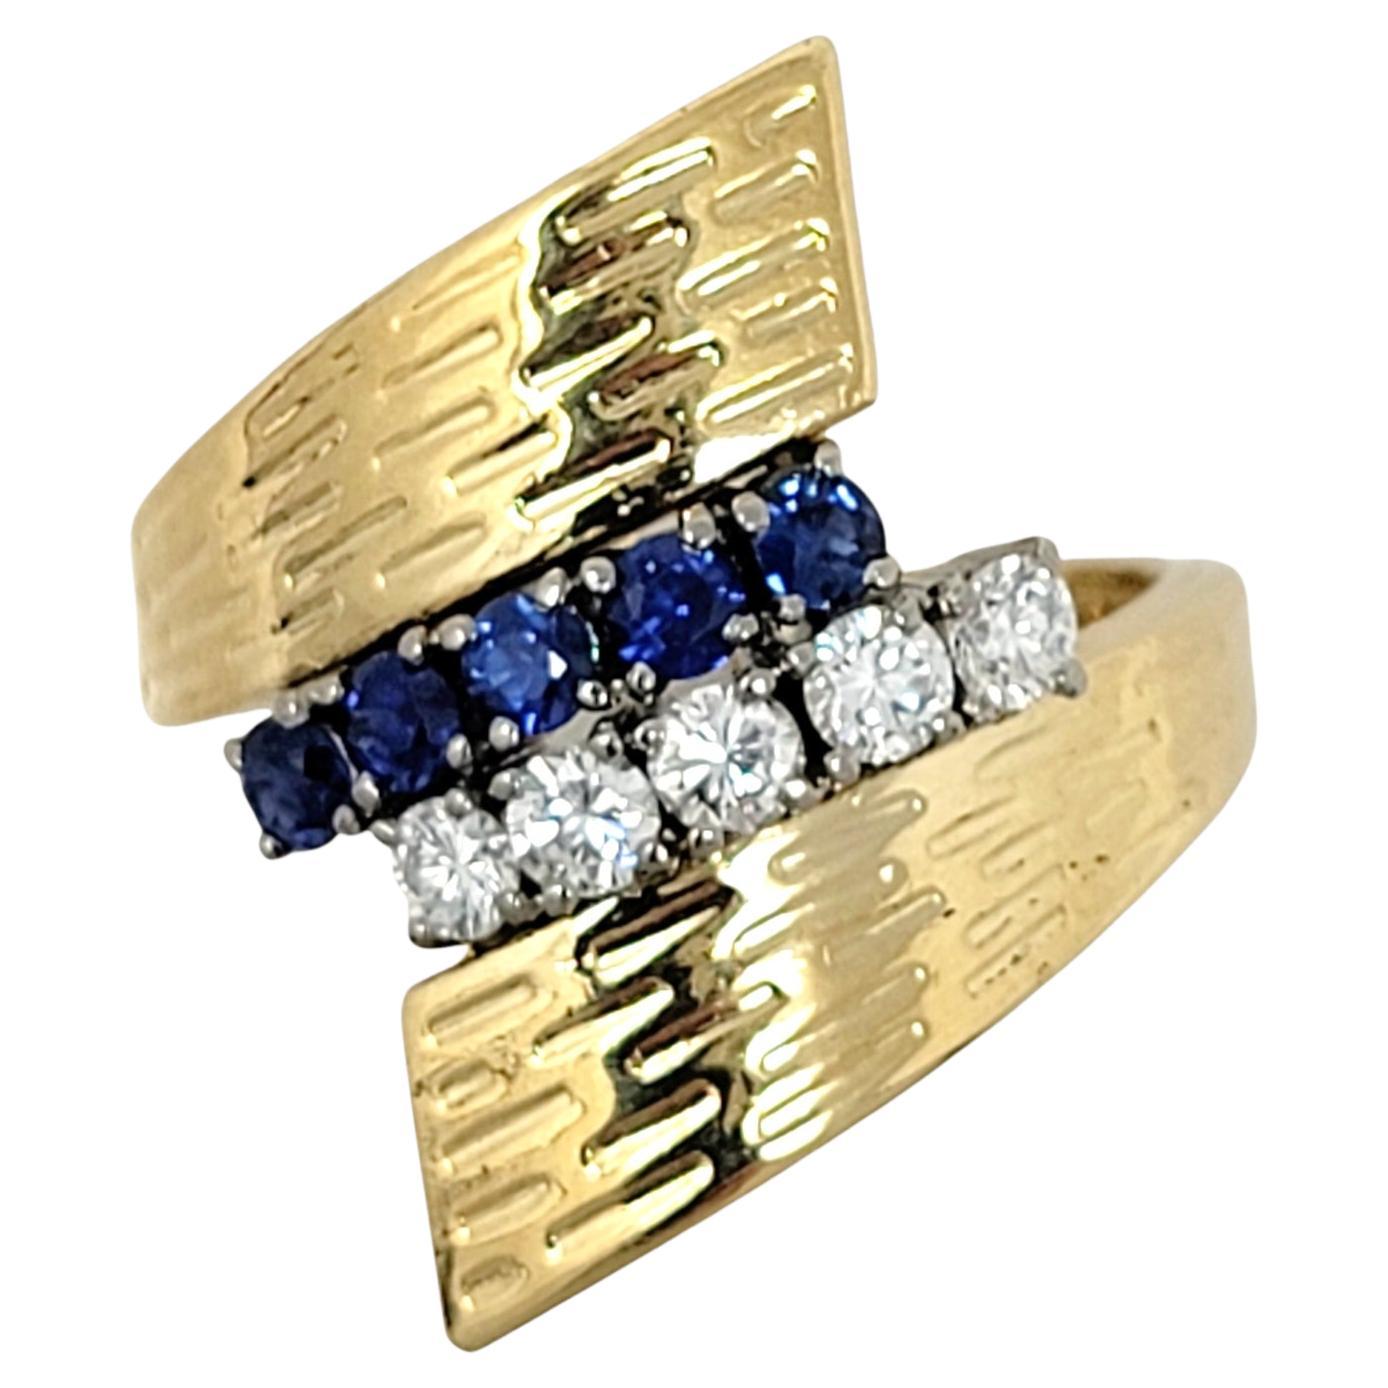 Textured 18 Karat Yellow Gold Wrap Ring with Natural Sapphires and Diamonds 